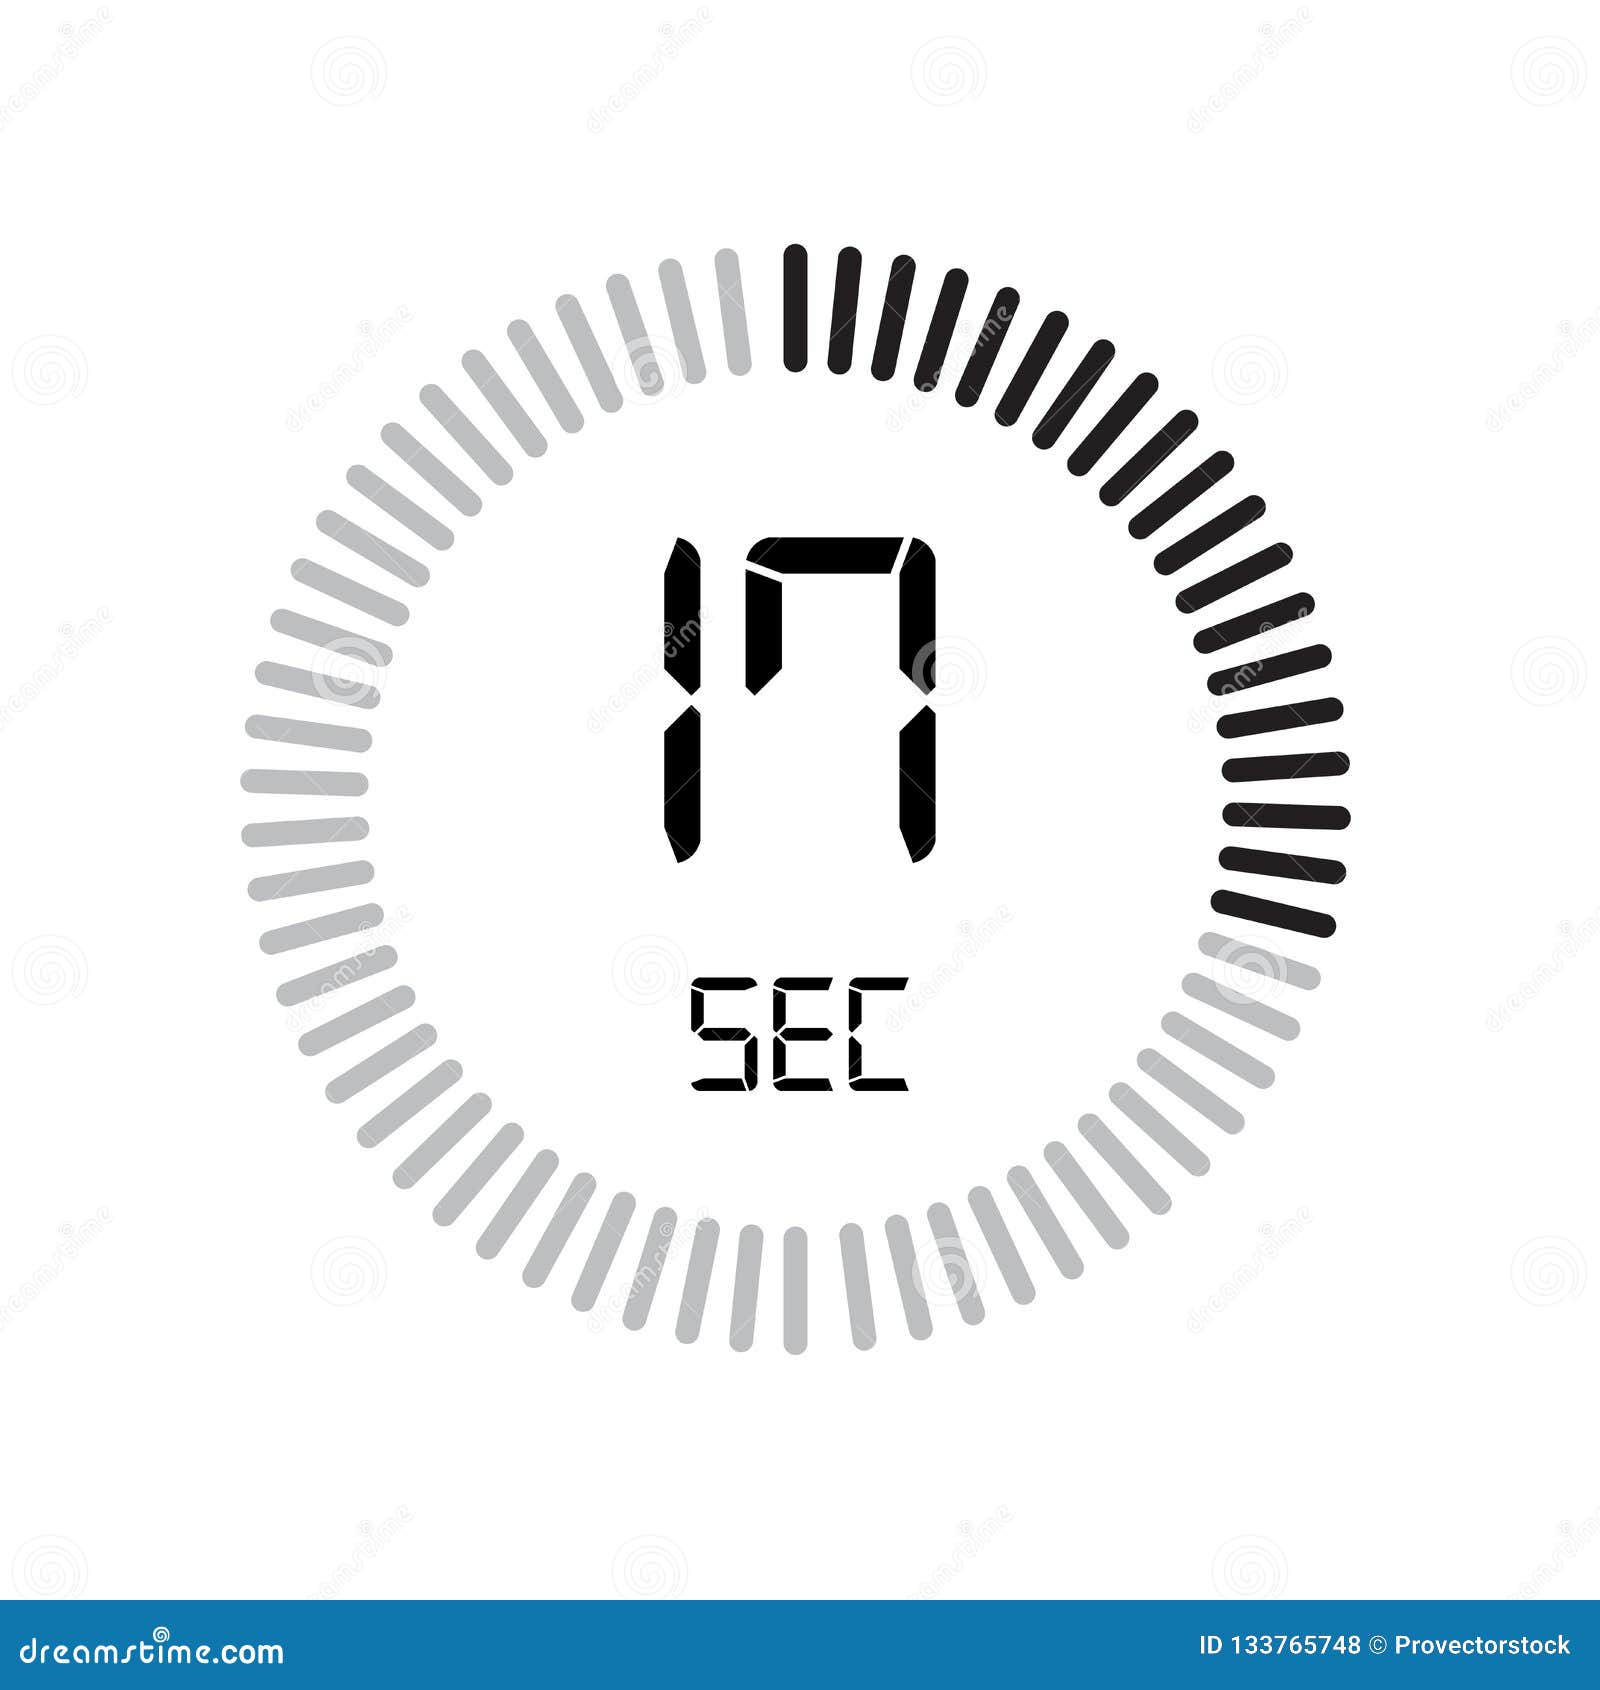 The 17 Seconds Digital Clock and Watch, Timer, Countdown Symbol Isolated on White Background, Stopwatch Vector Icon Stock Vector - Illustration of timer, arrow: 133765748